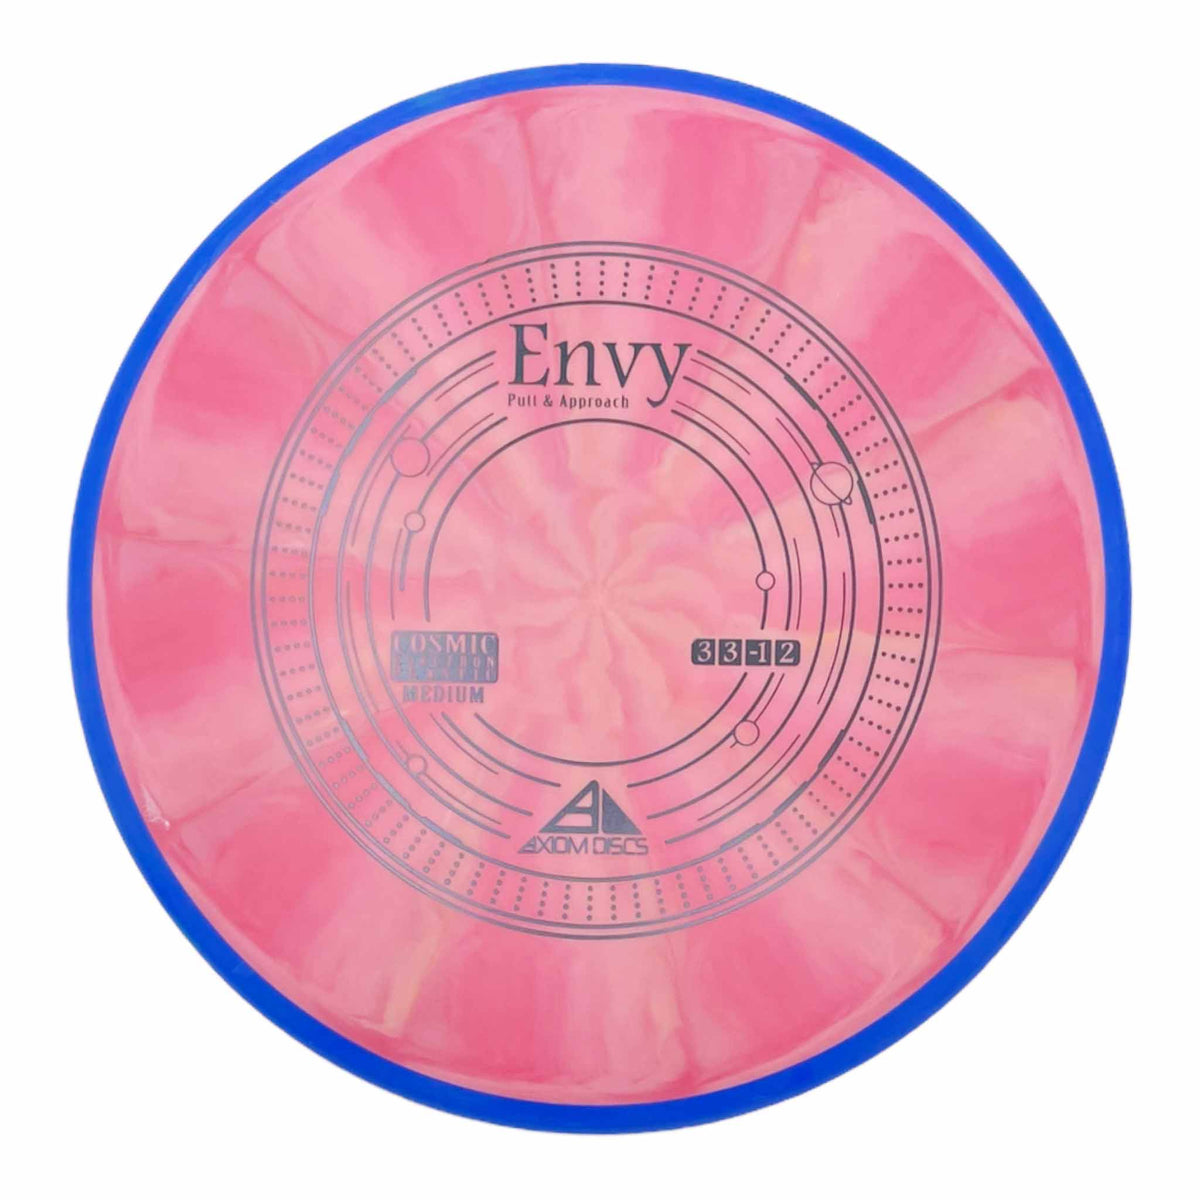 Axiom Discs Cosmic Electron Medium Envy putter and approach - Pink / Blue